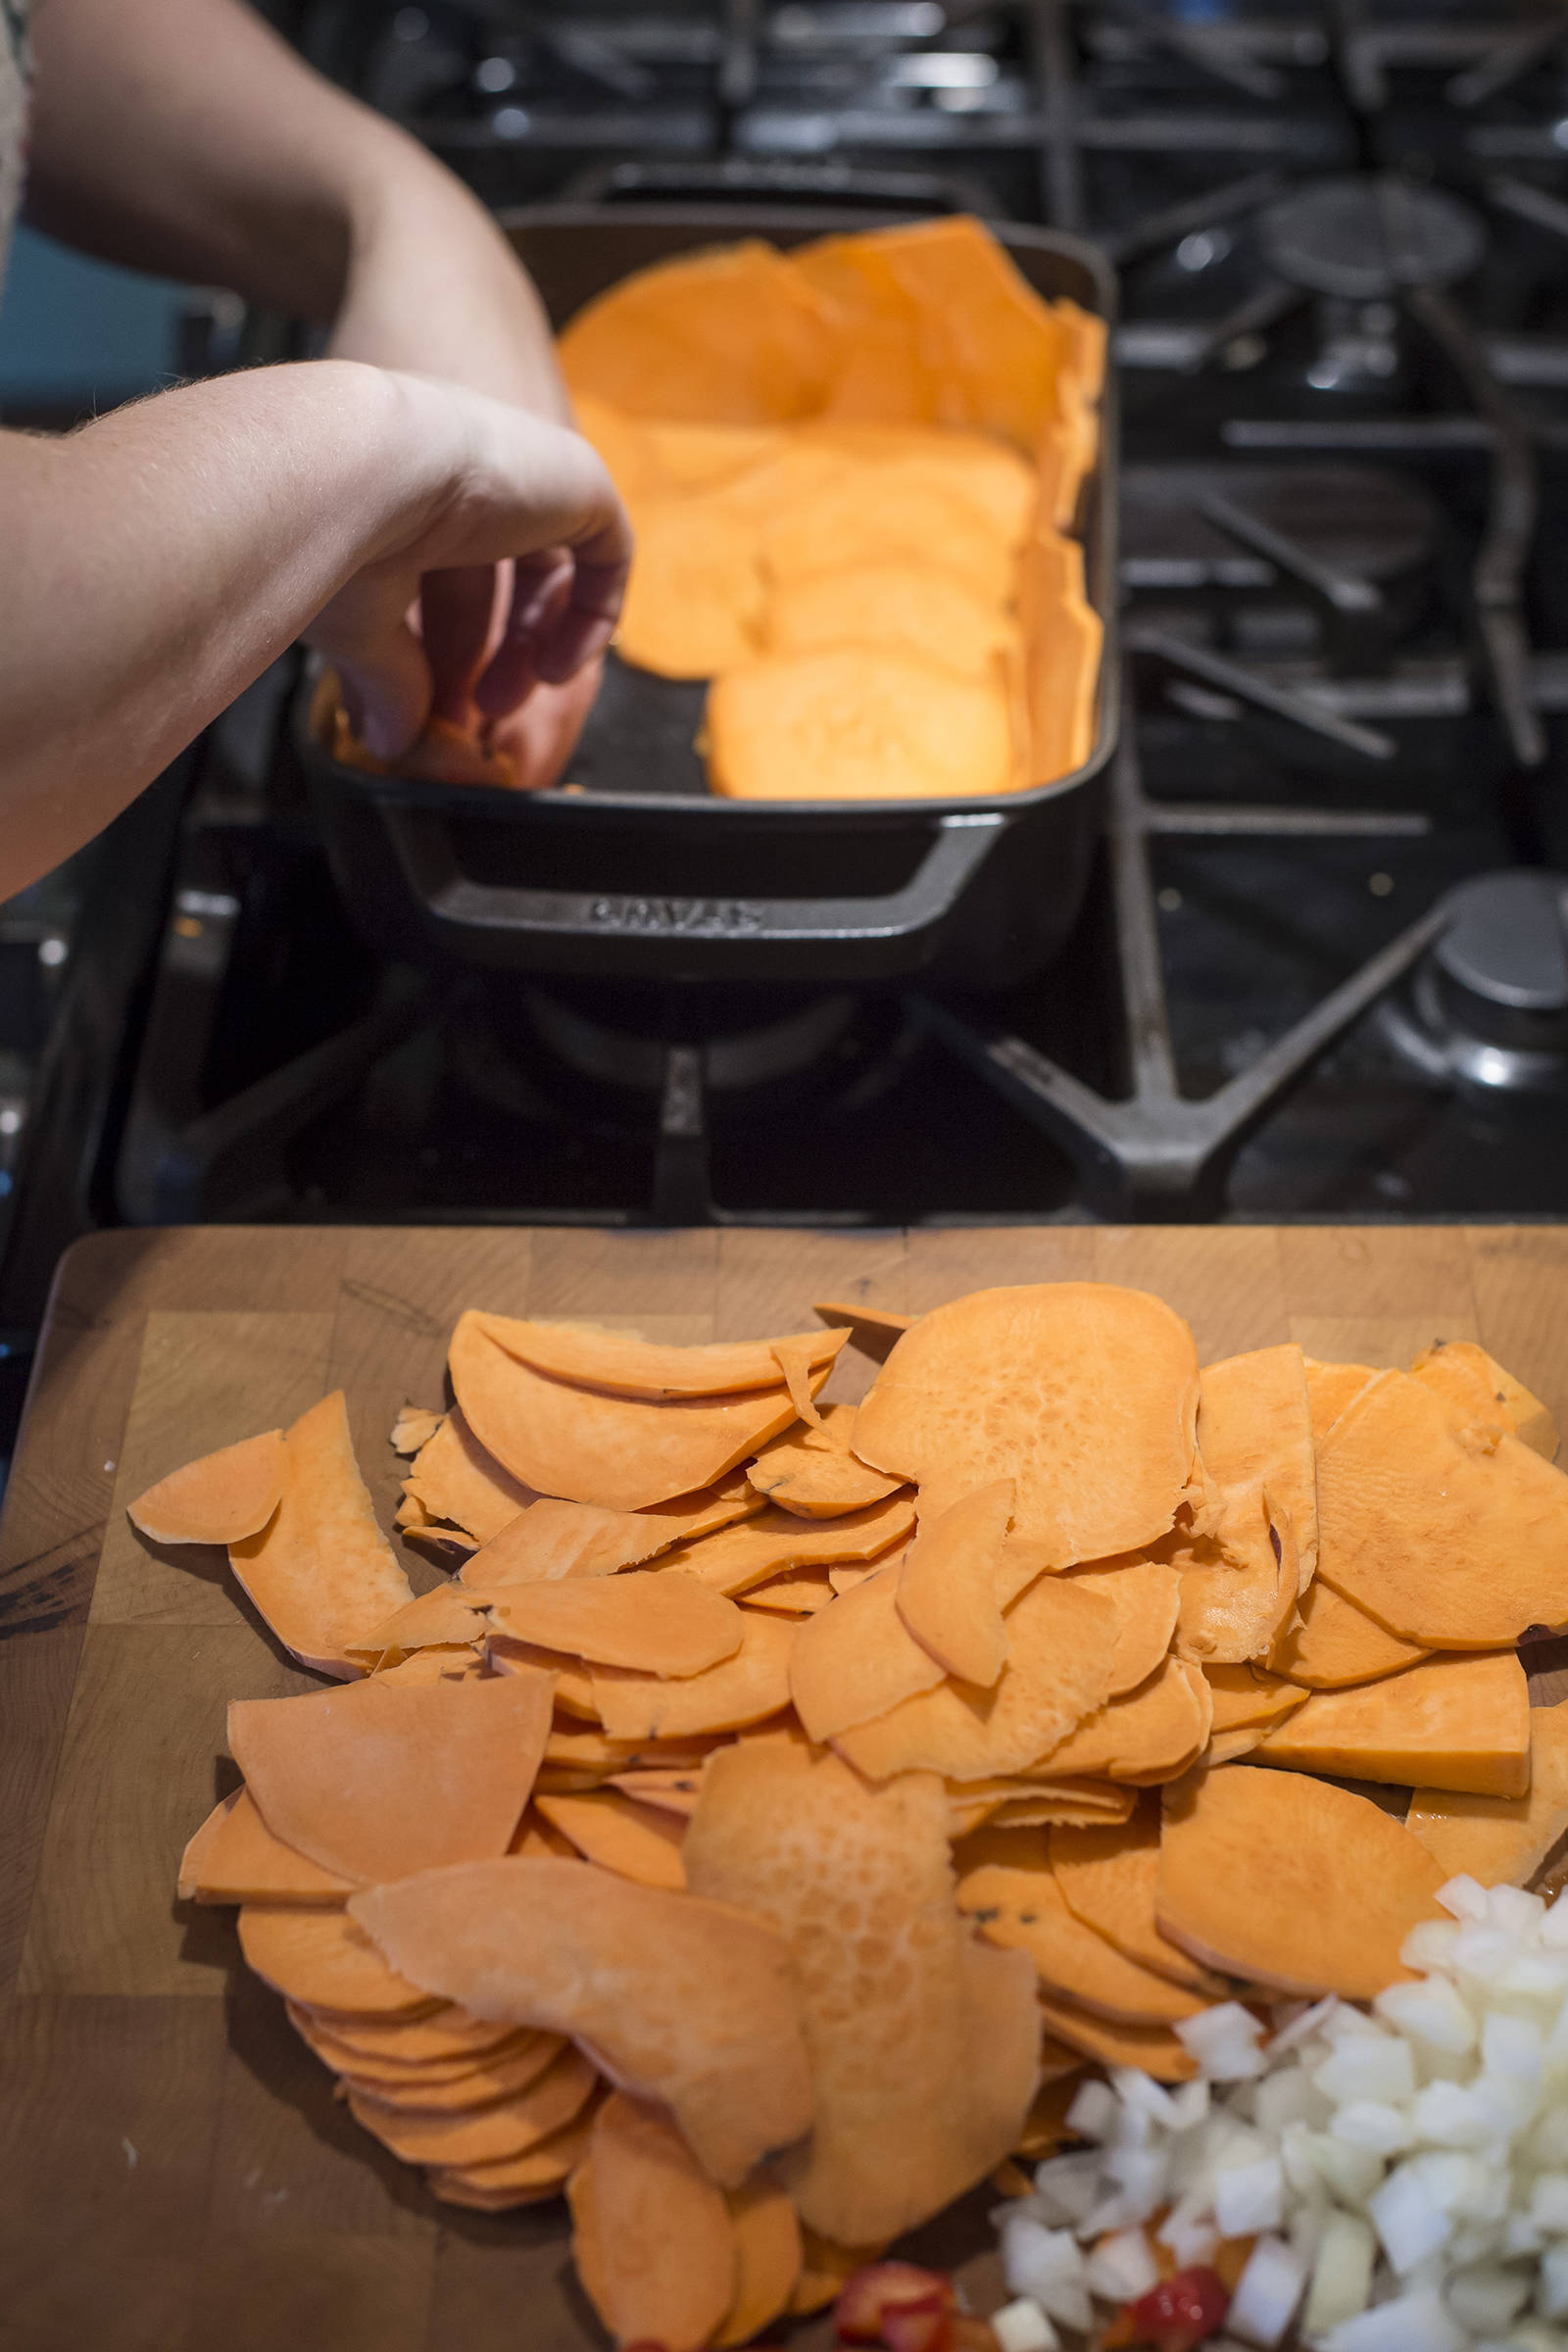 Erin Anais Heist lines a baking pan with sweet potato slices for a quiche in her home kitchen on Thursday, Oct. 4, 2018. (Michael Penn | Juneau Empire)